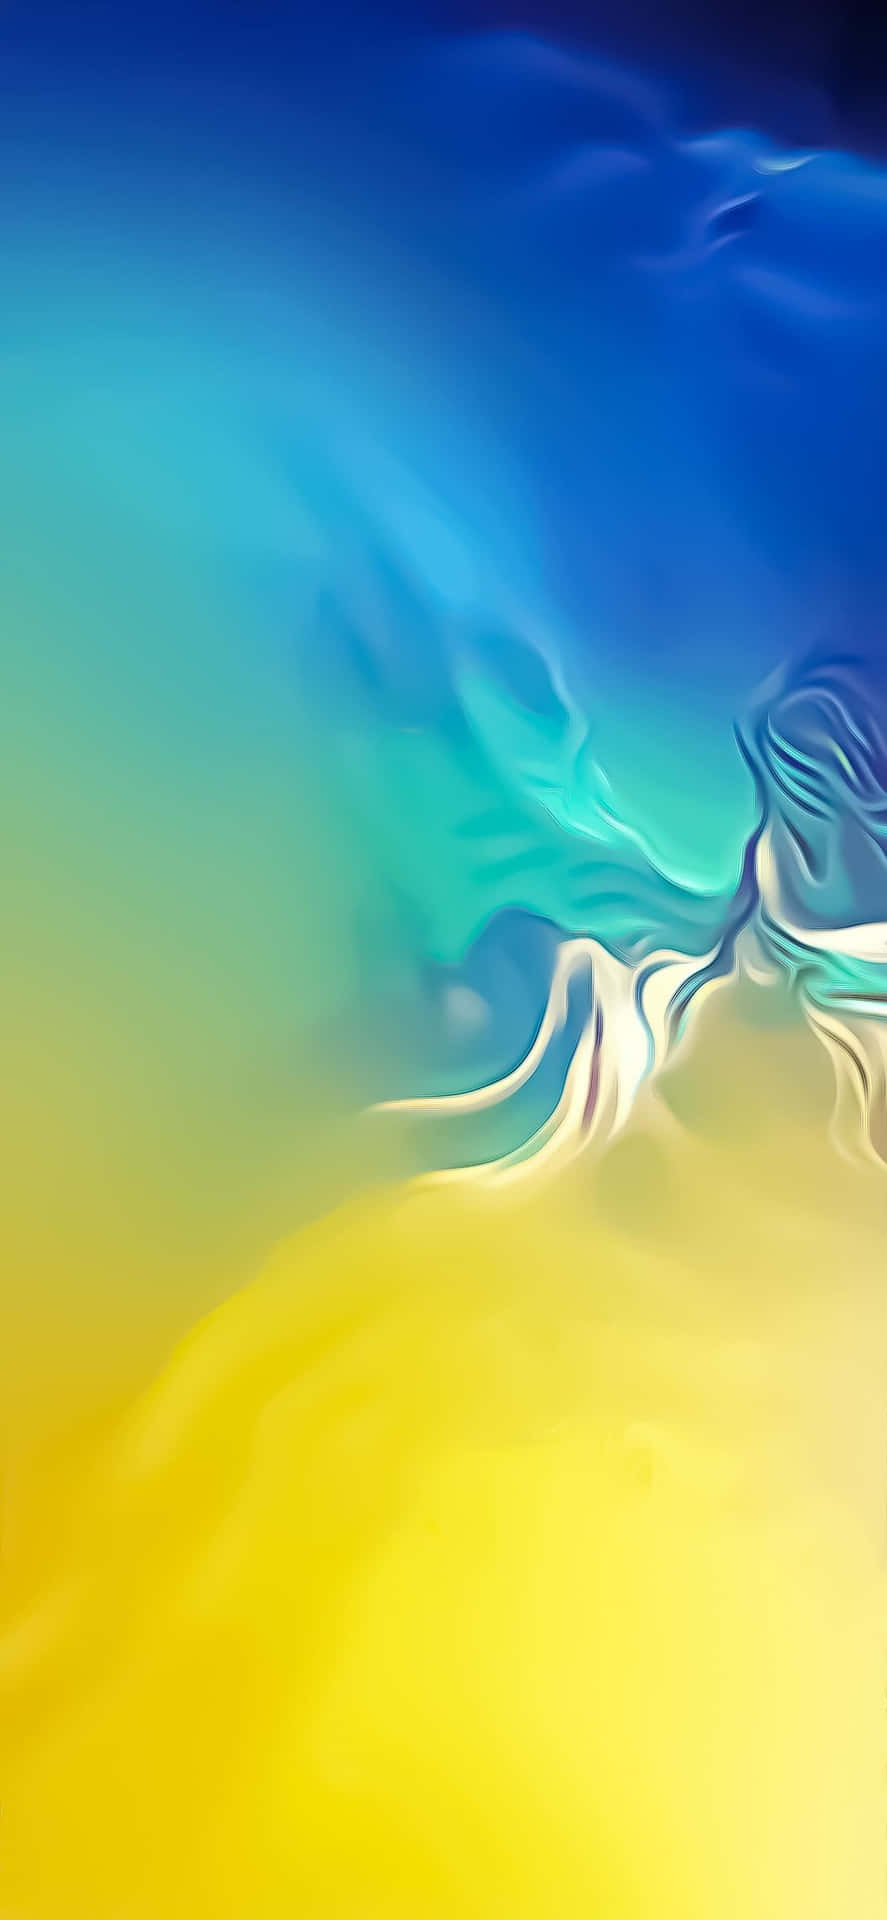 A Blue And Yellow Background With A Blue And Yellow Wave Wallpaper